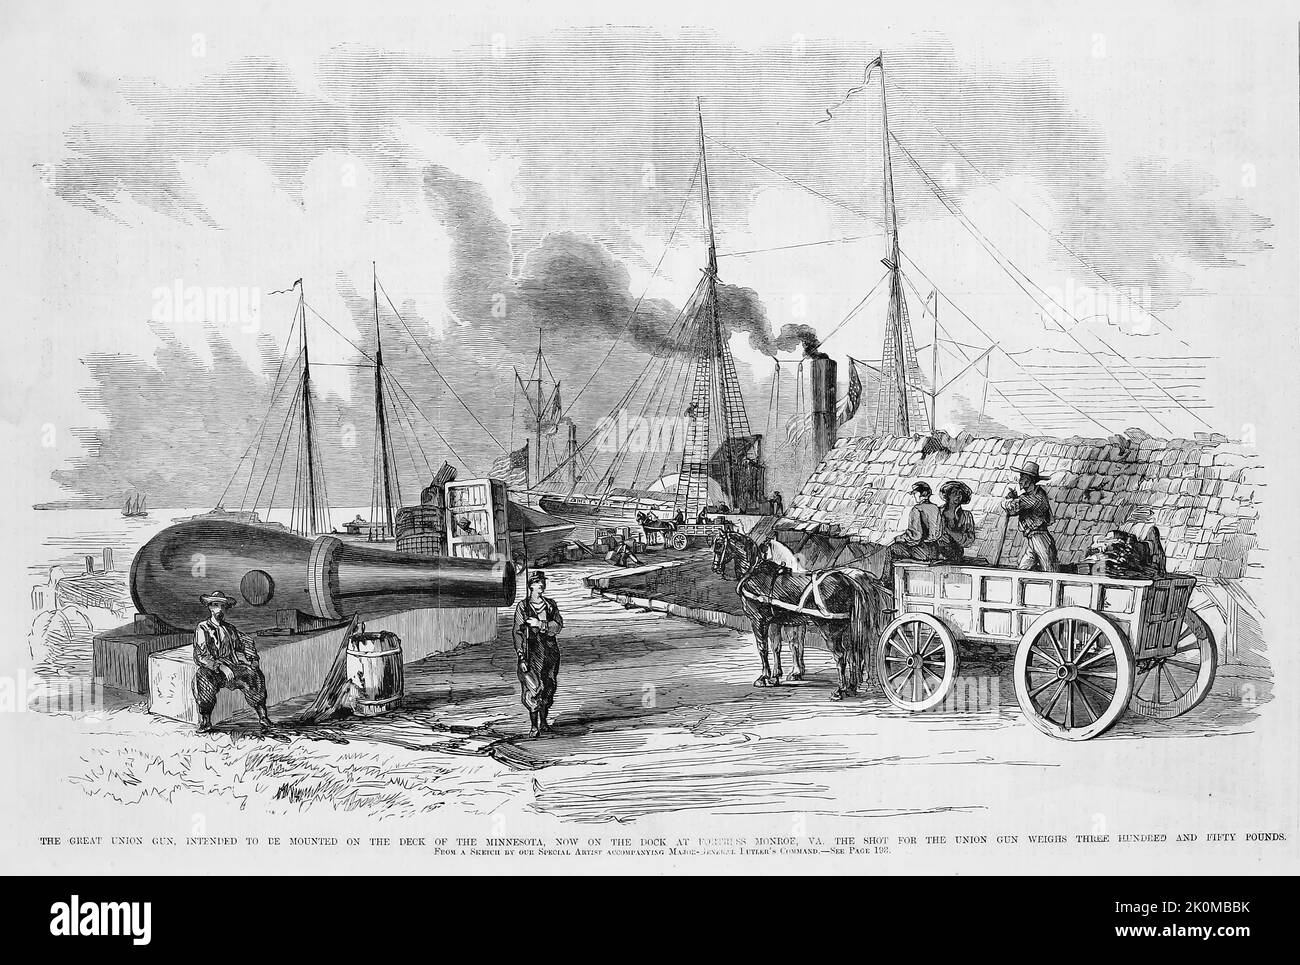 The great Union gun, intended to be mounted on the deck of the Minnesota, now on the dock at Fort Monroe, Virginia - The shot for the Union gun weighs three hundred and fifty pounds. August 1861. 19th century American Civil War illustration from Frank Leslie's Illustrated Newspaper Stock Photo